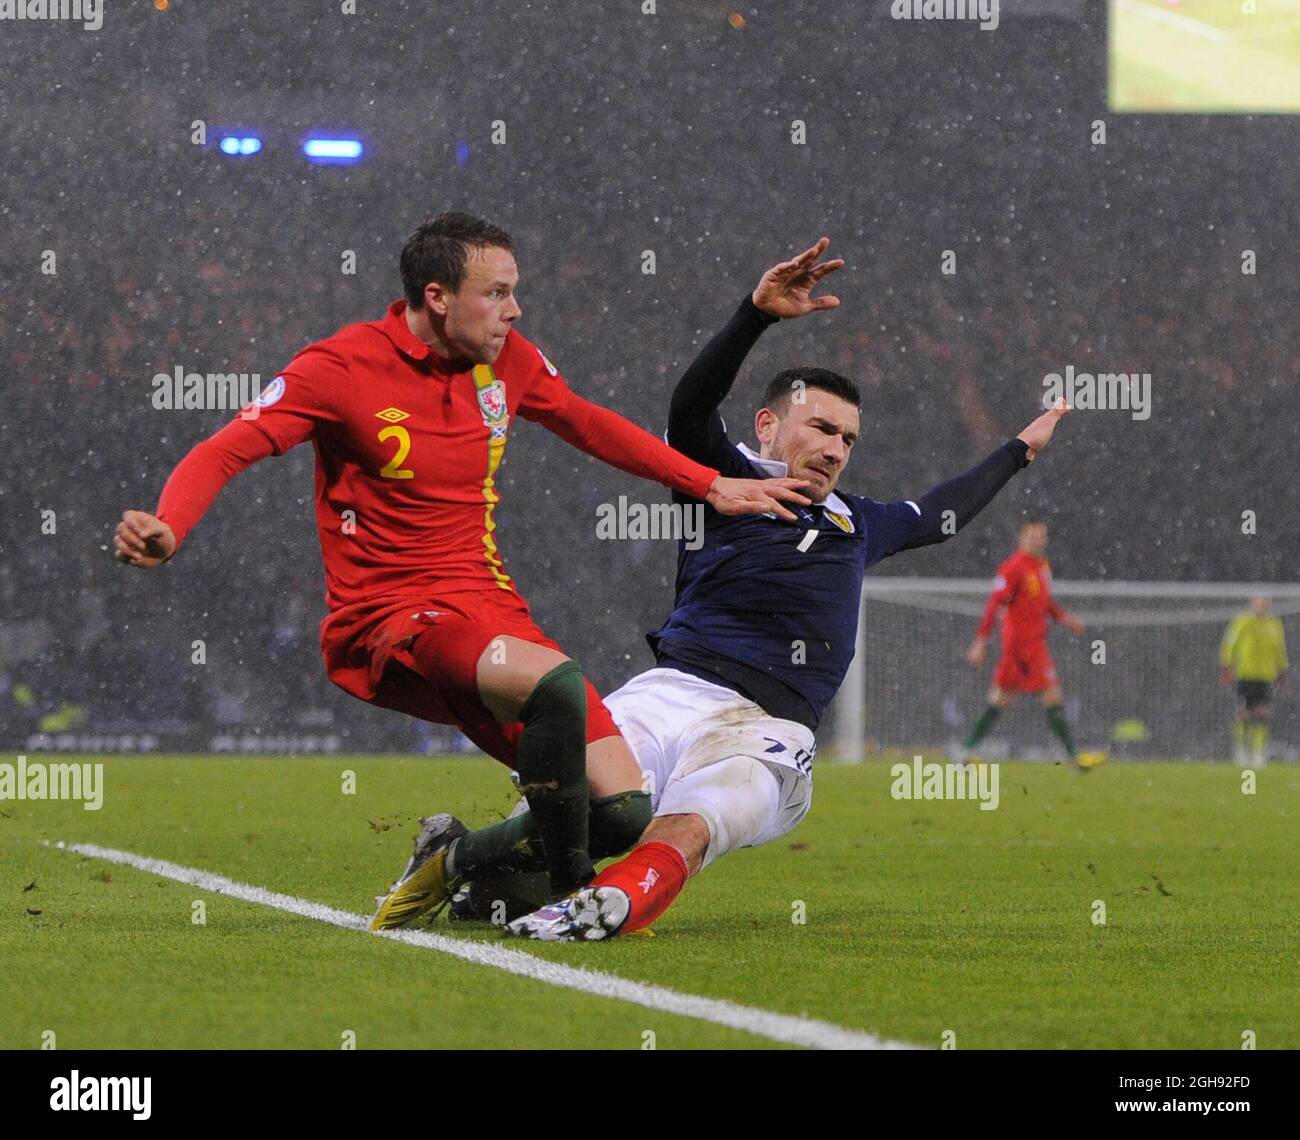 Robert Snodgrass of Scotland fouls Chris Gunter of Wales to be sent off and concede a penalty during the FIFA 2014 World Cup Group A qualifying match between Scotland and Wales at Hampden Park in Glasgow, Scotland on on March 22, 2013. Stock Photo